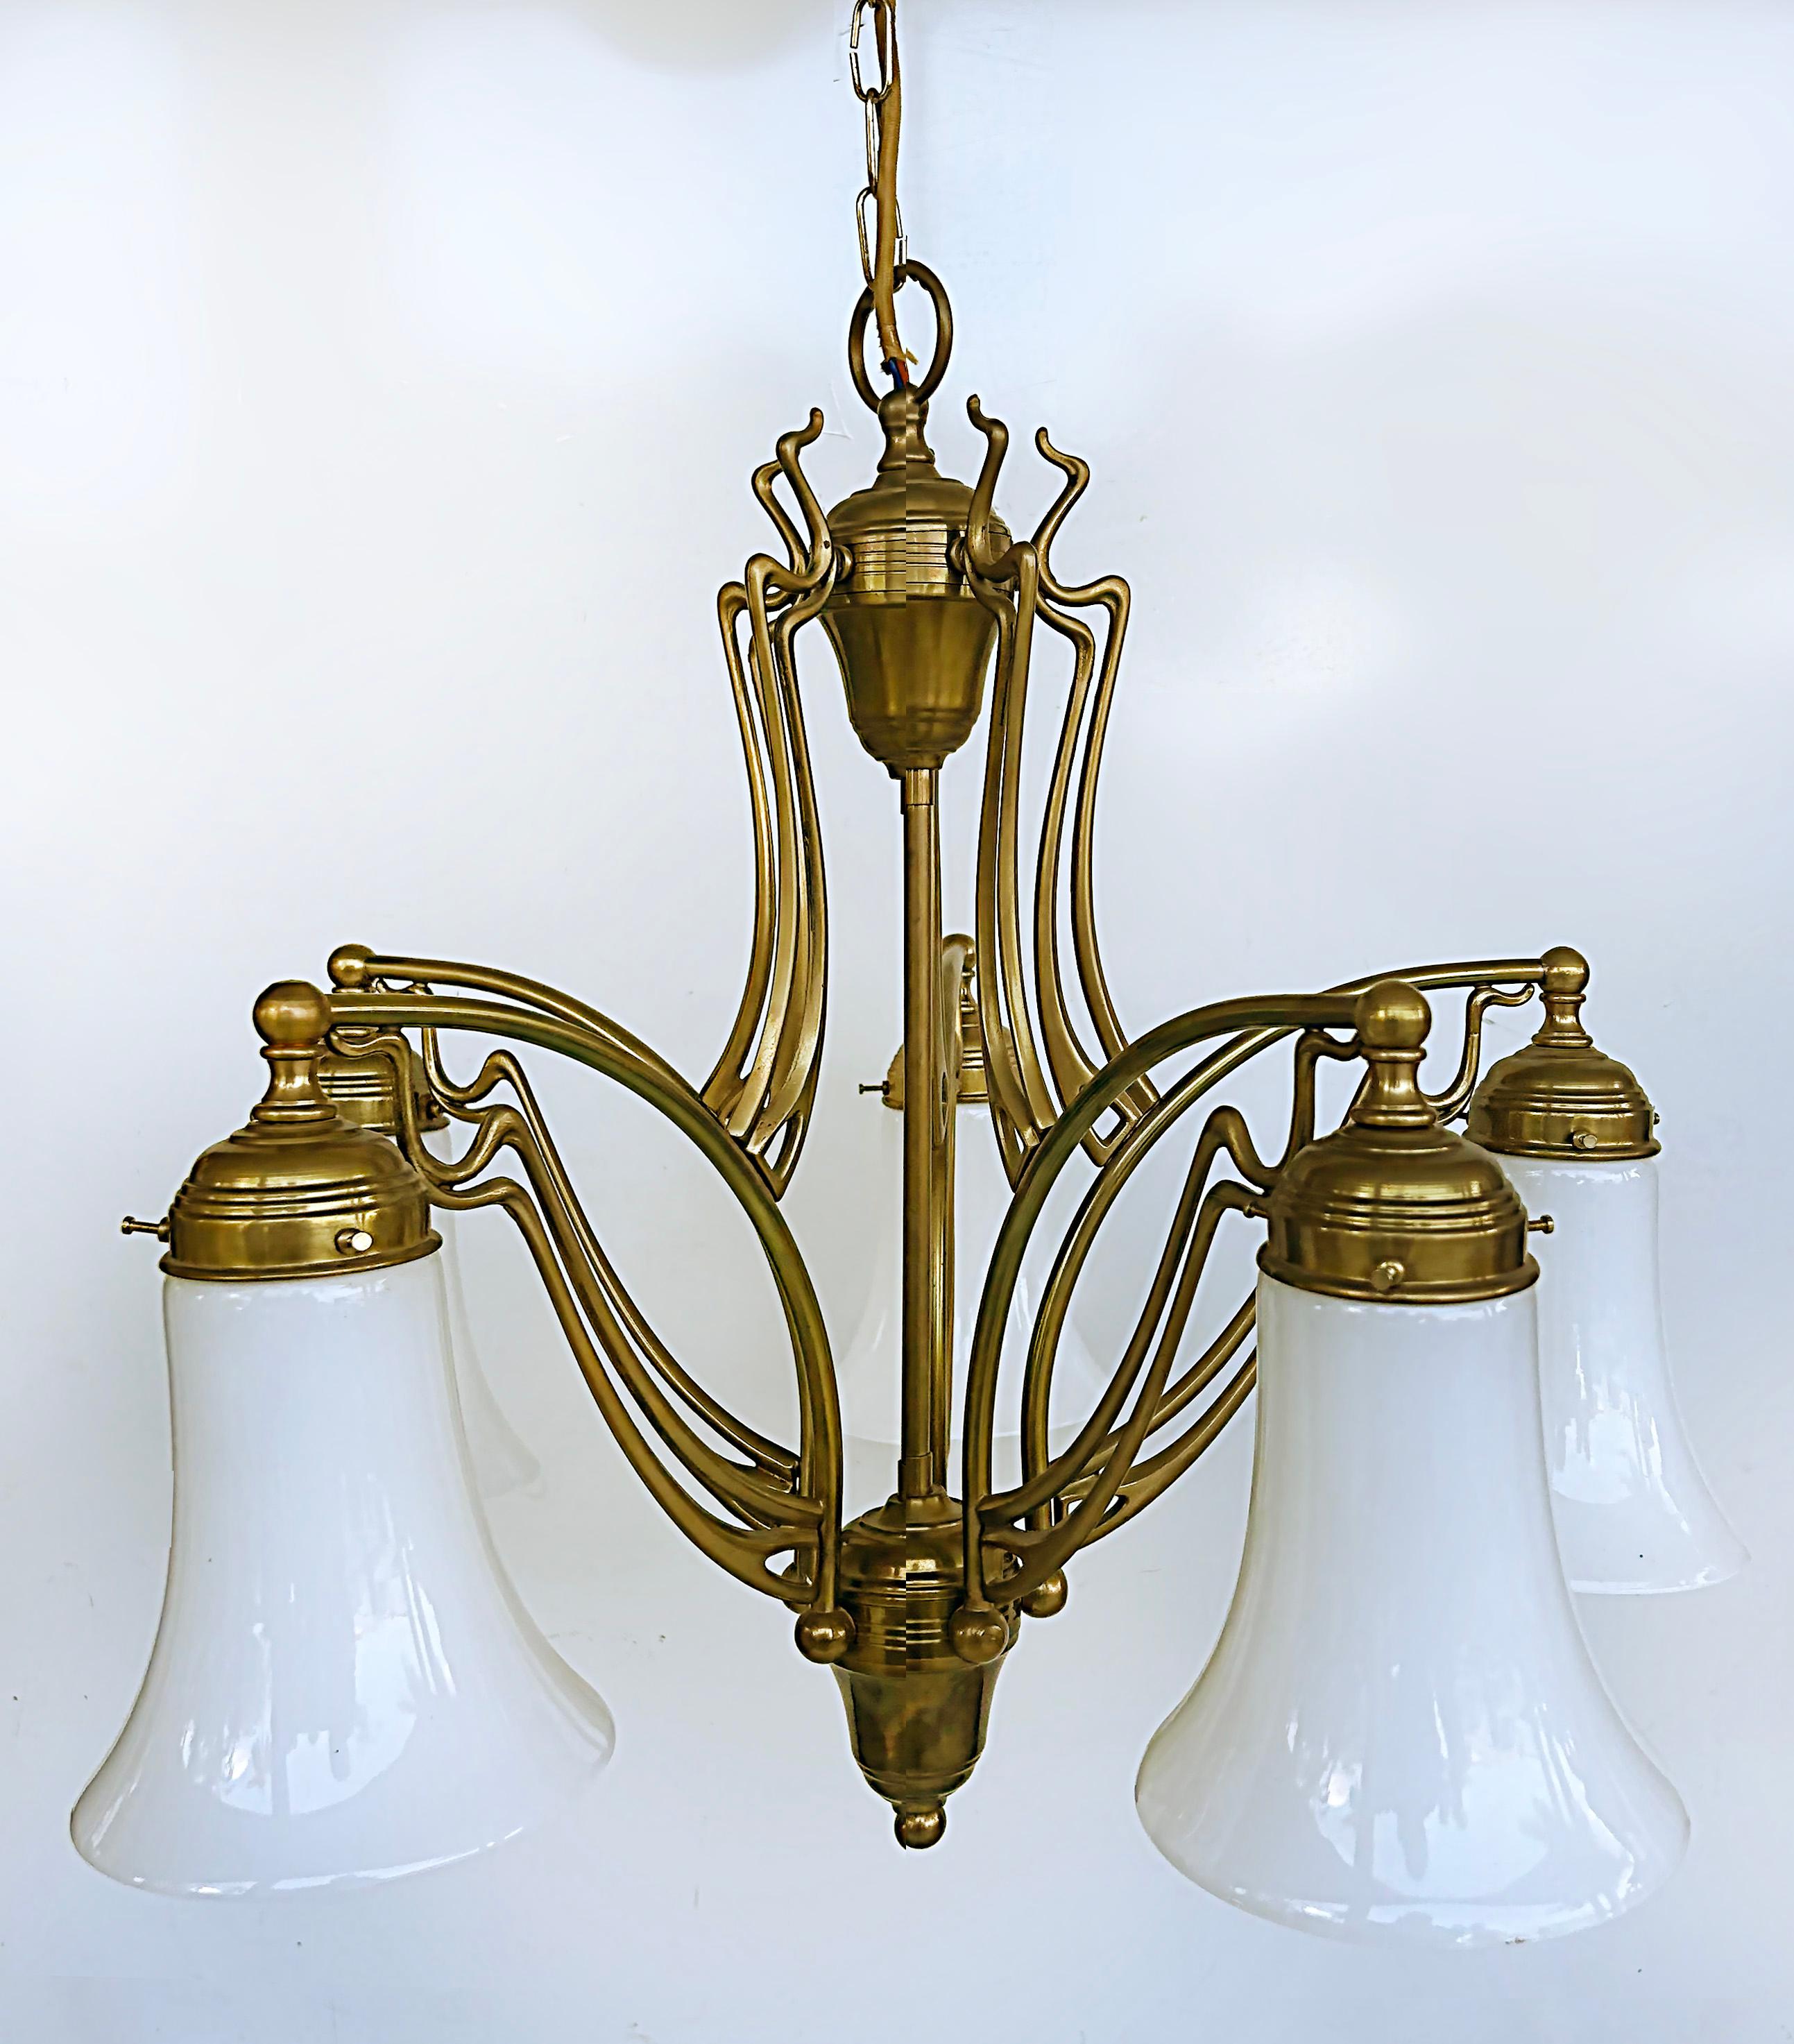 1920s Bronze Art Nouveau German 5-Arm Chandelier, Milk Glass Shades 

Offered for sale is a German Art Nouveau bronze and milk glass five-arm chandelier. The owner acquired this chandelier while living in the Charlottenburg area of Germany and